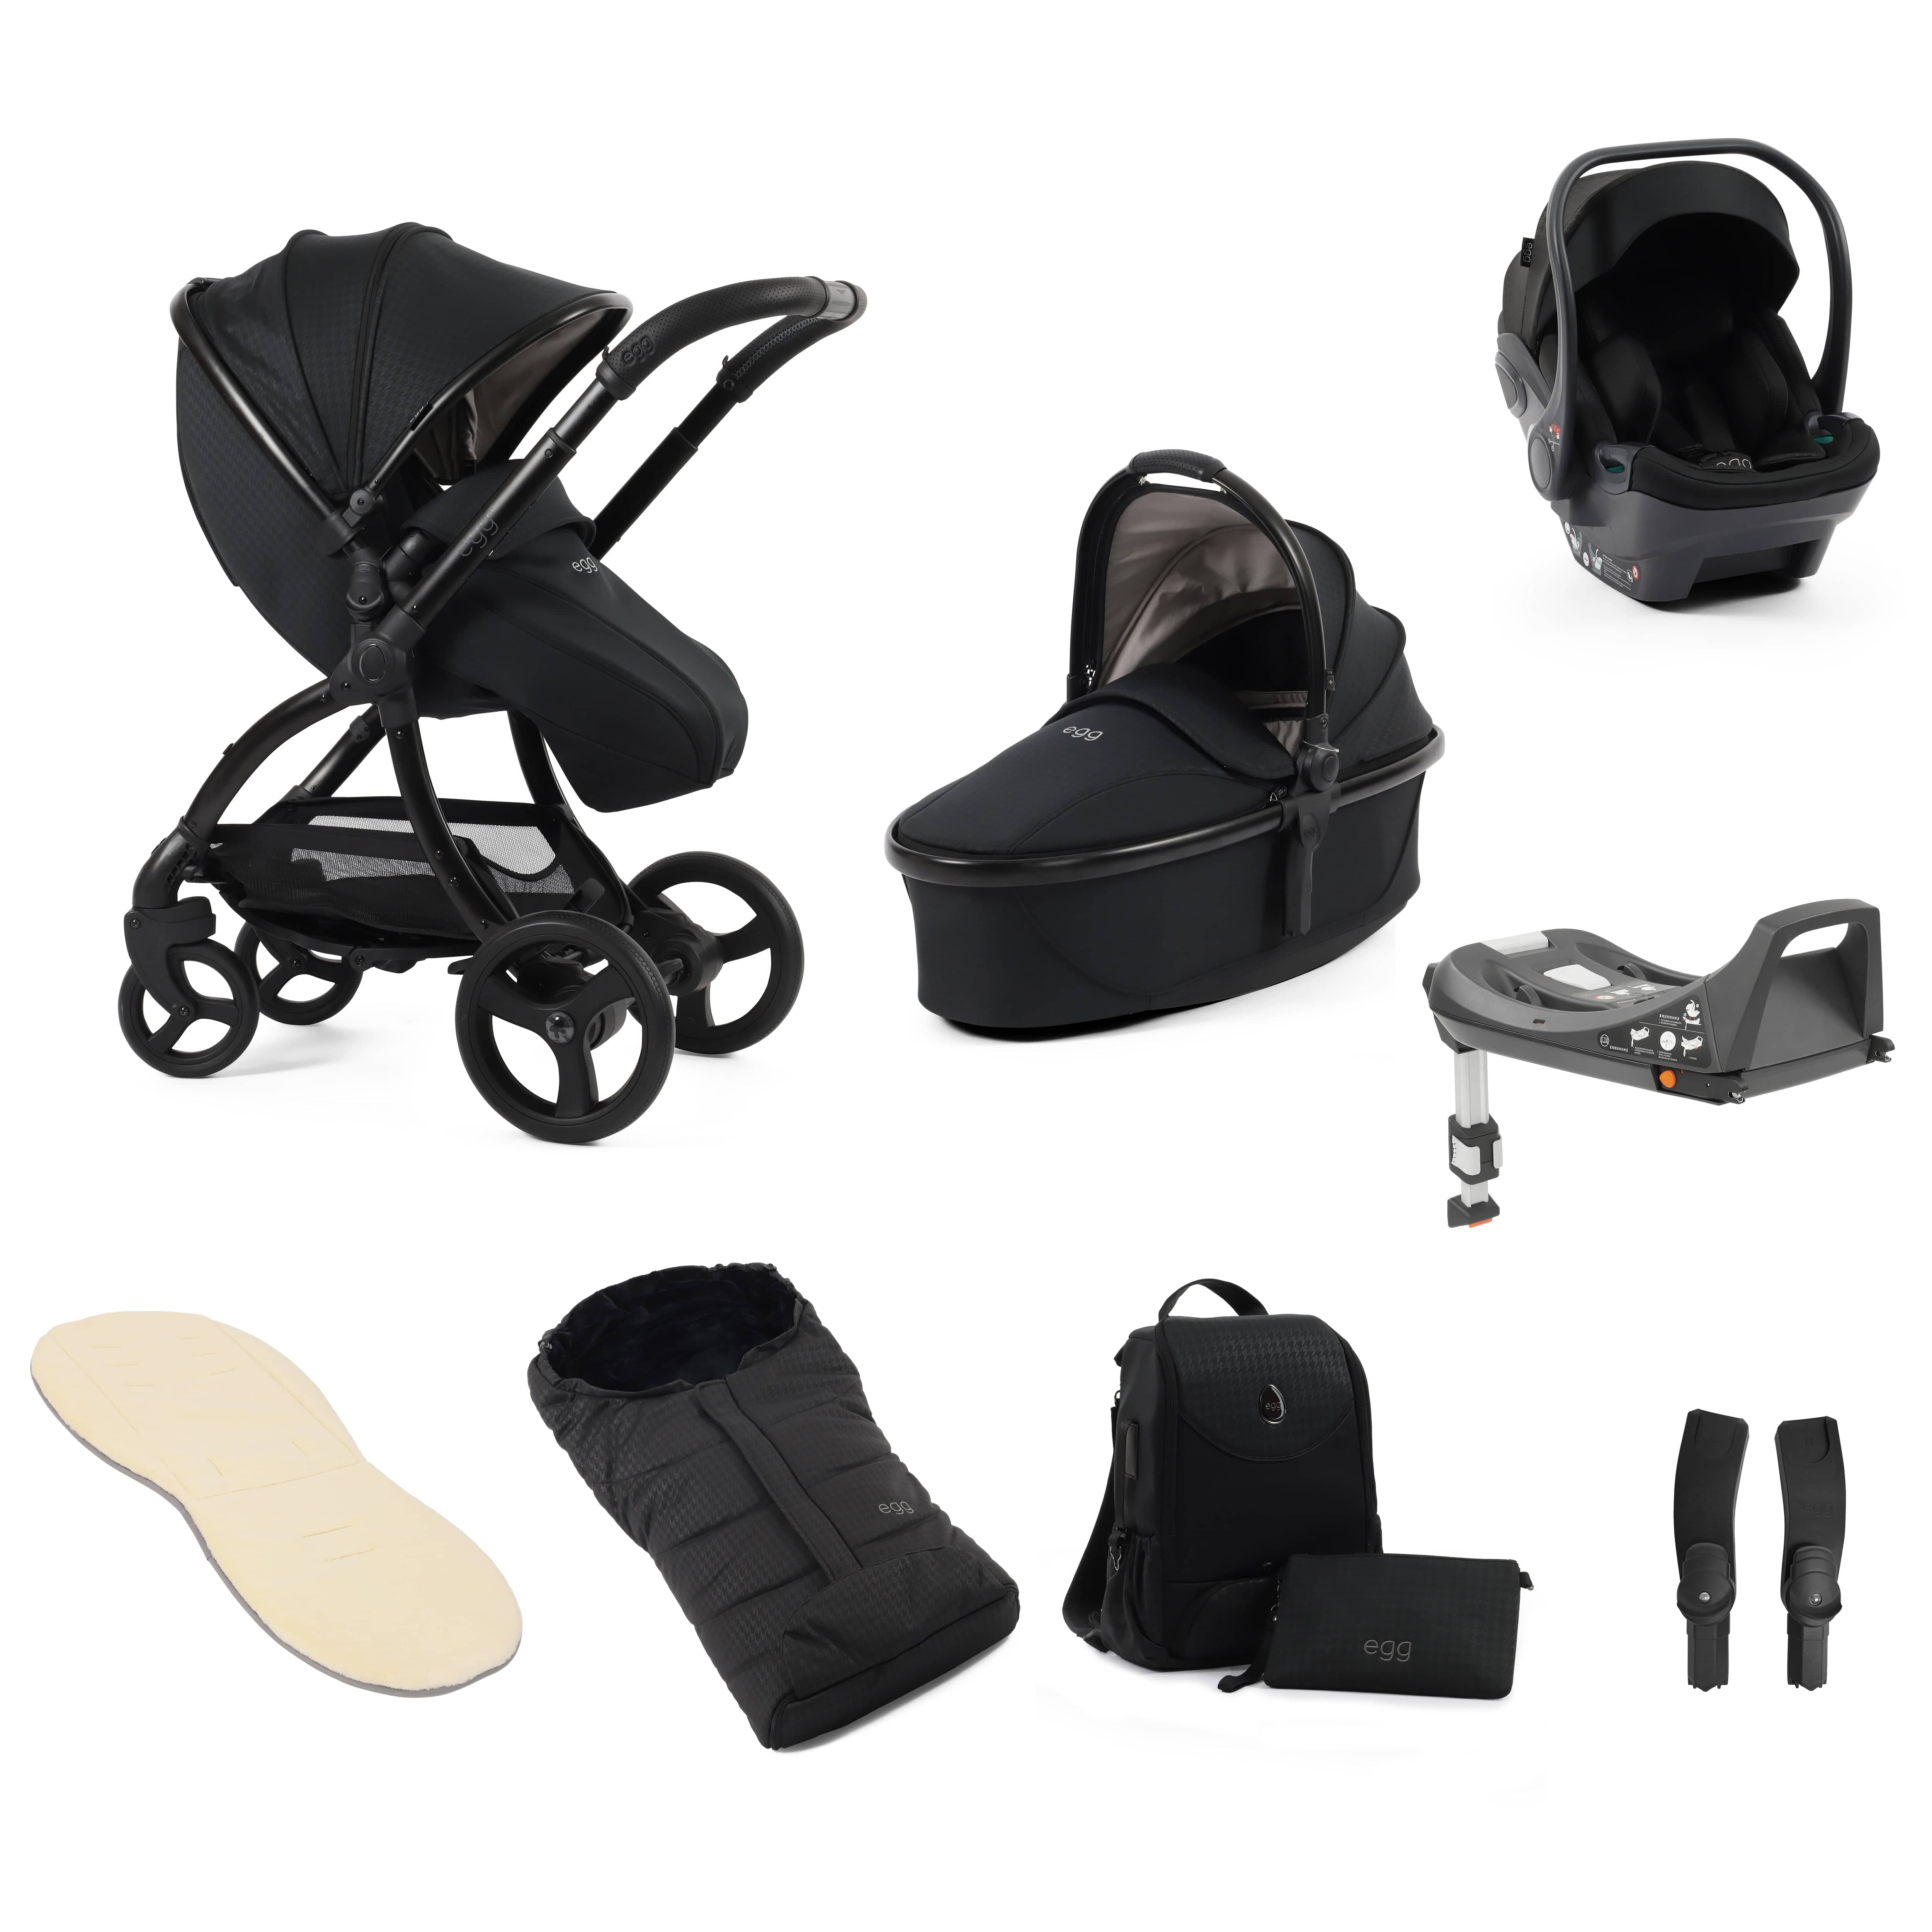 egg3 Luxury Travel System Bundle Special Edition Houndstooth Black Baby Prams 14727-HTB 5060711567853